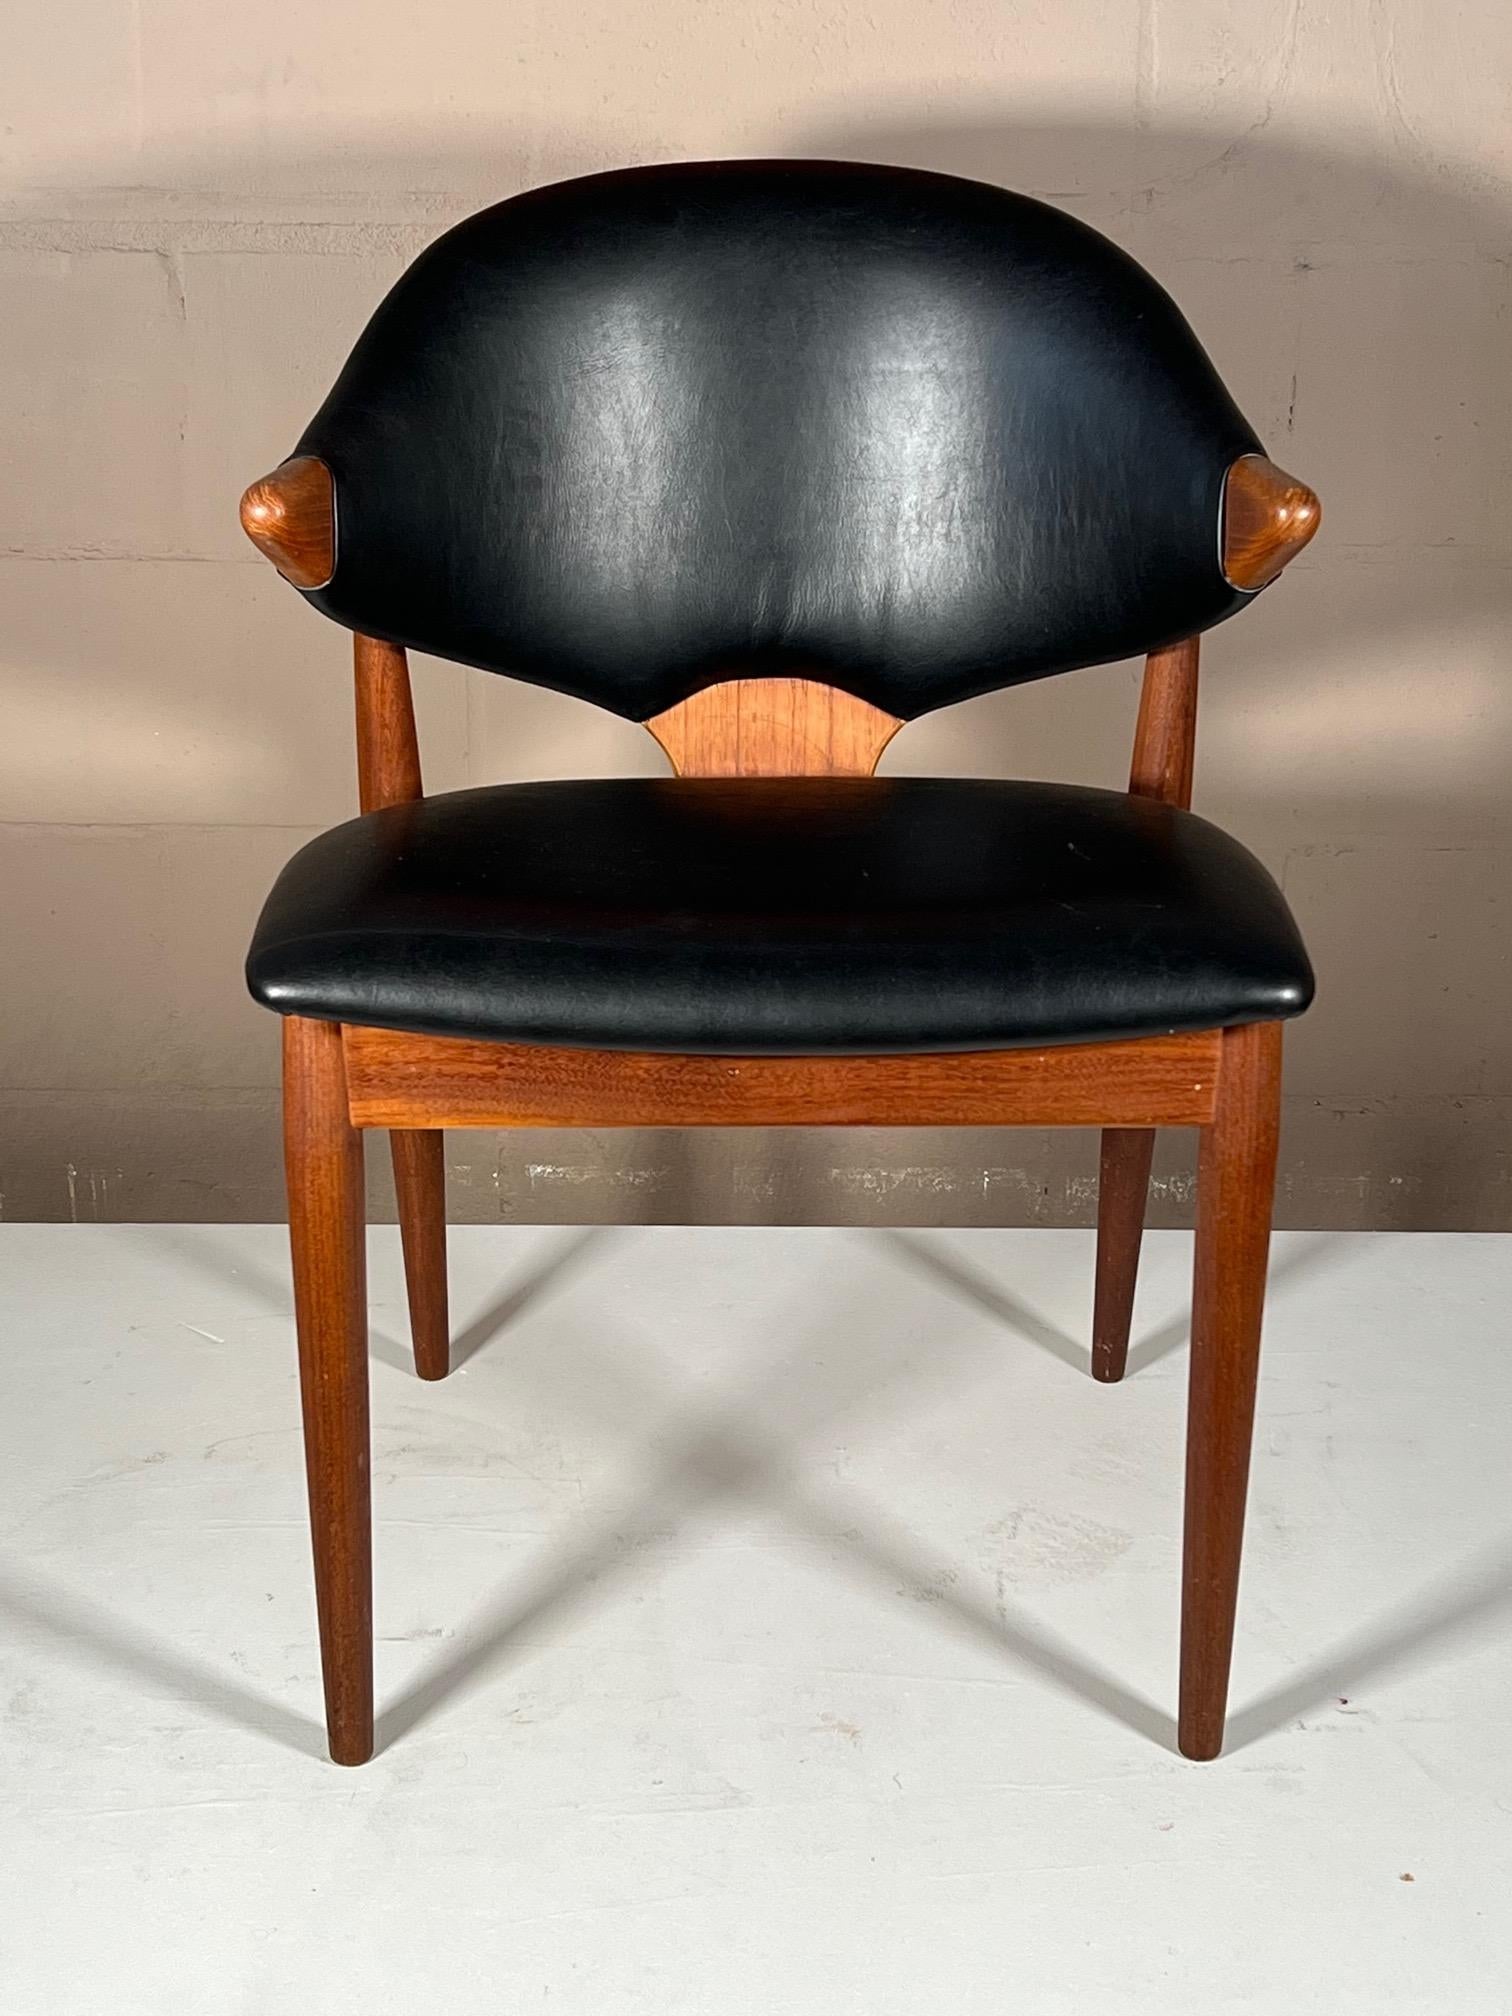 A Classic and slightly sinister Arne Vodder chair for Vamo Sonderborg, made in Denmark circa 1960s. Teak and newly reupholstered in black Italian leather. Perfect as a desk or occasional chair-looks great from every angle.
The arms are 25.75